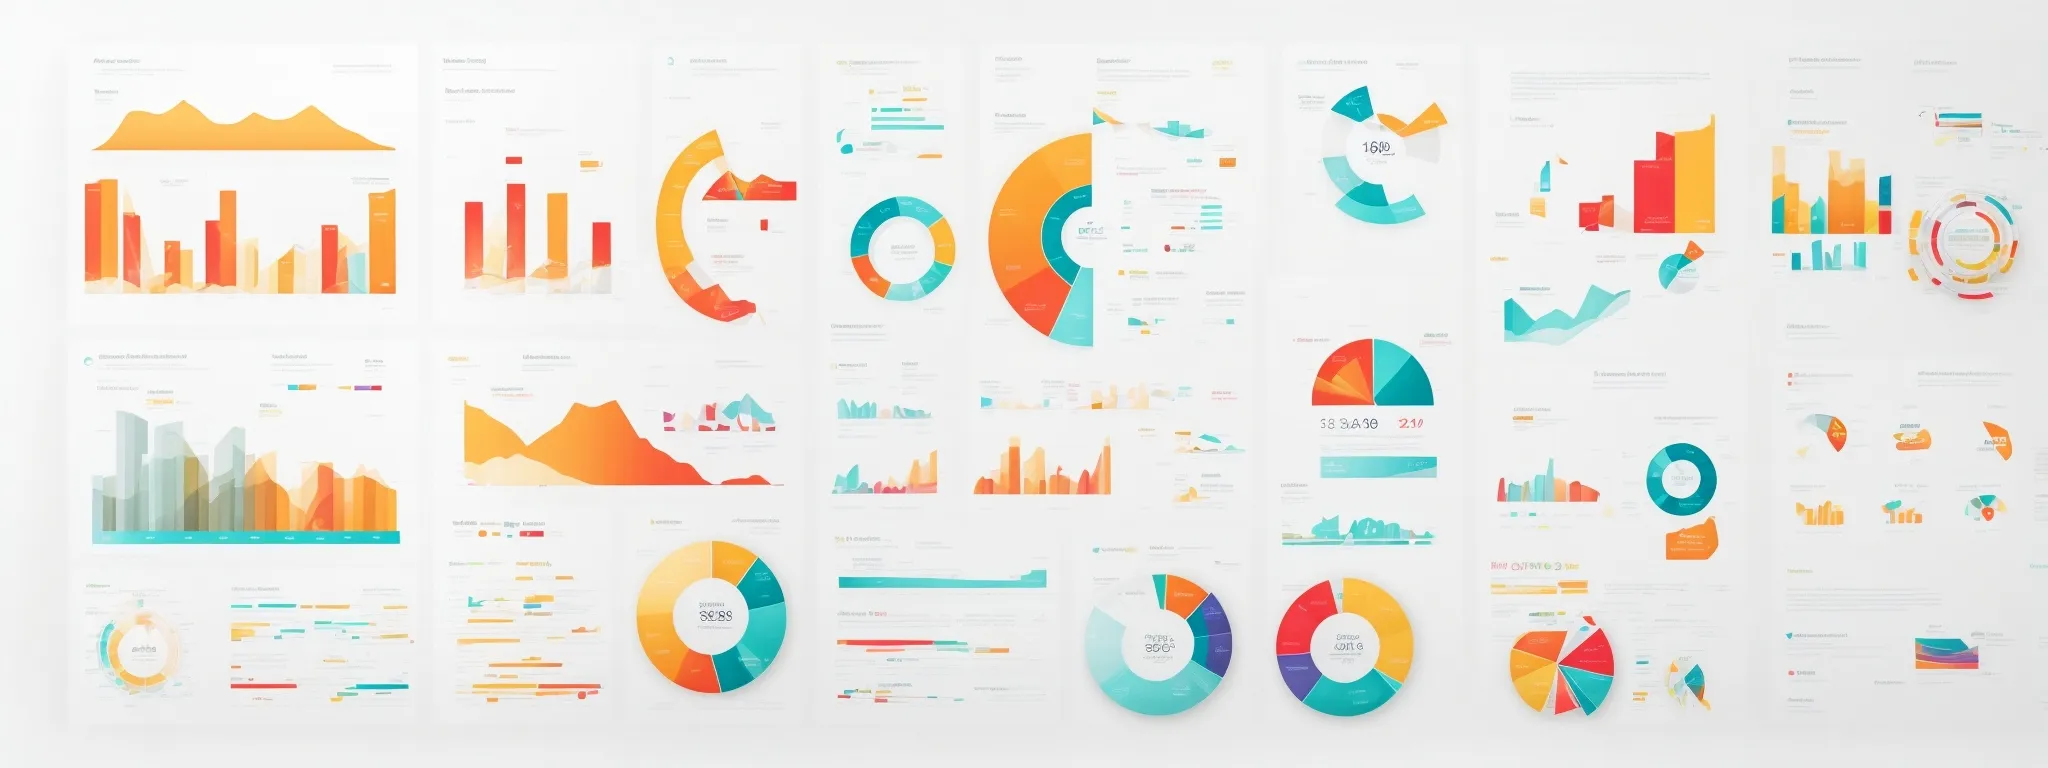 a close-up of an infographic illustrating seo strategies with colorful charts and icons on a clean white background.